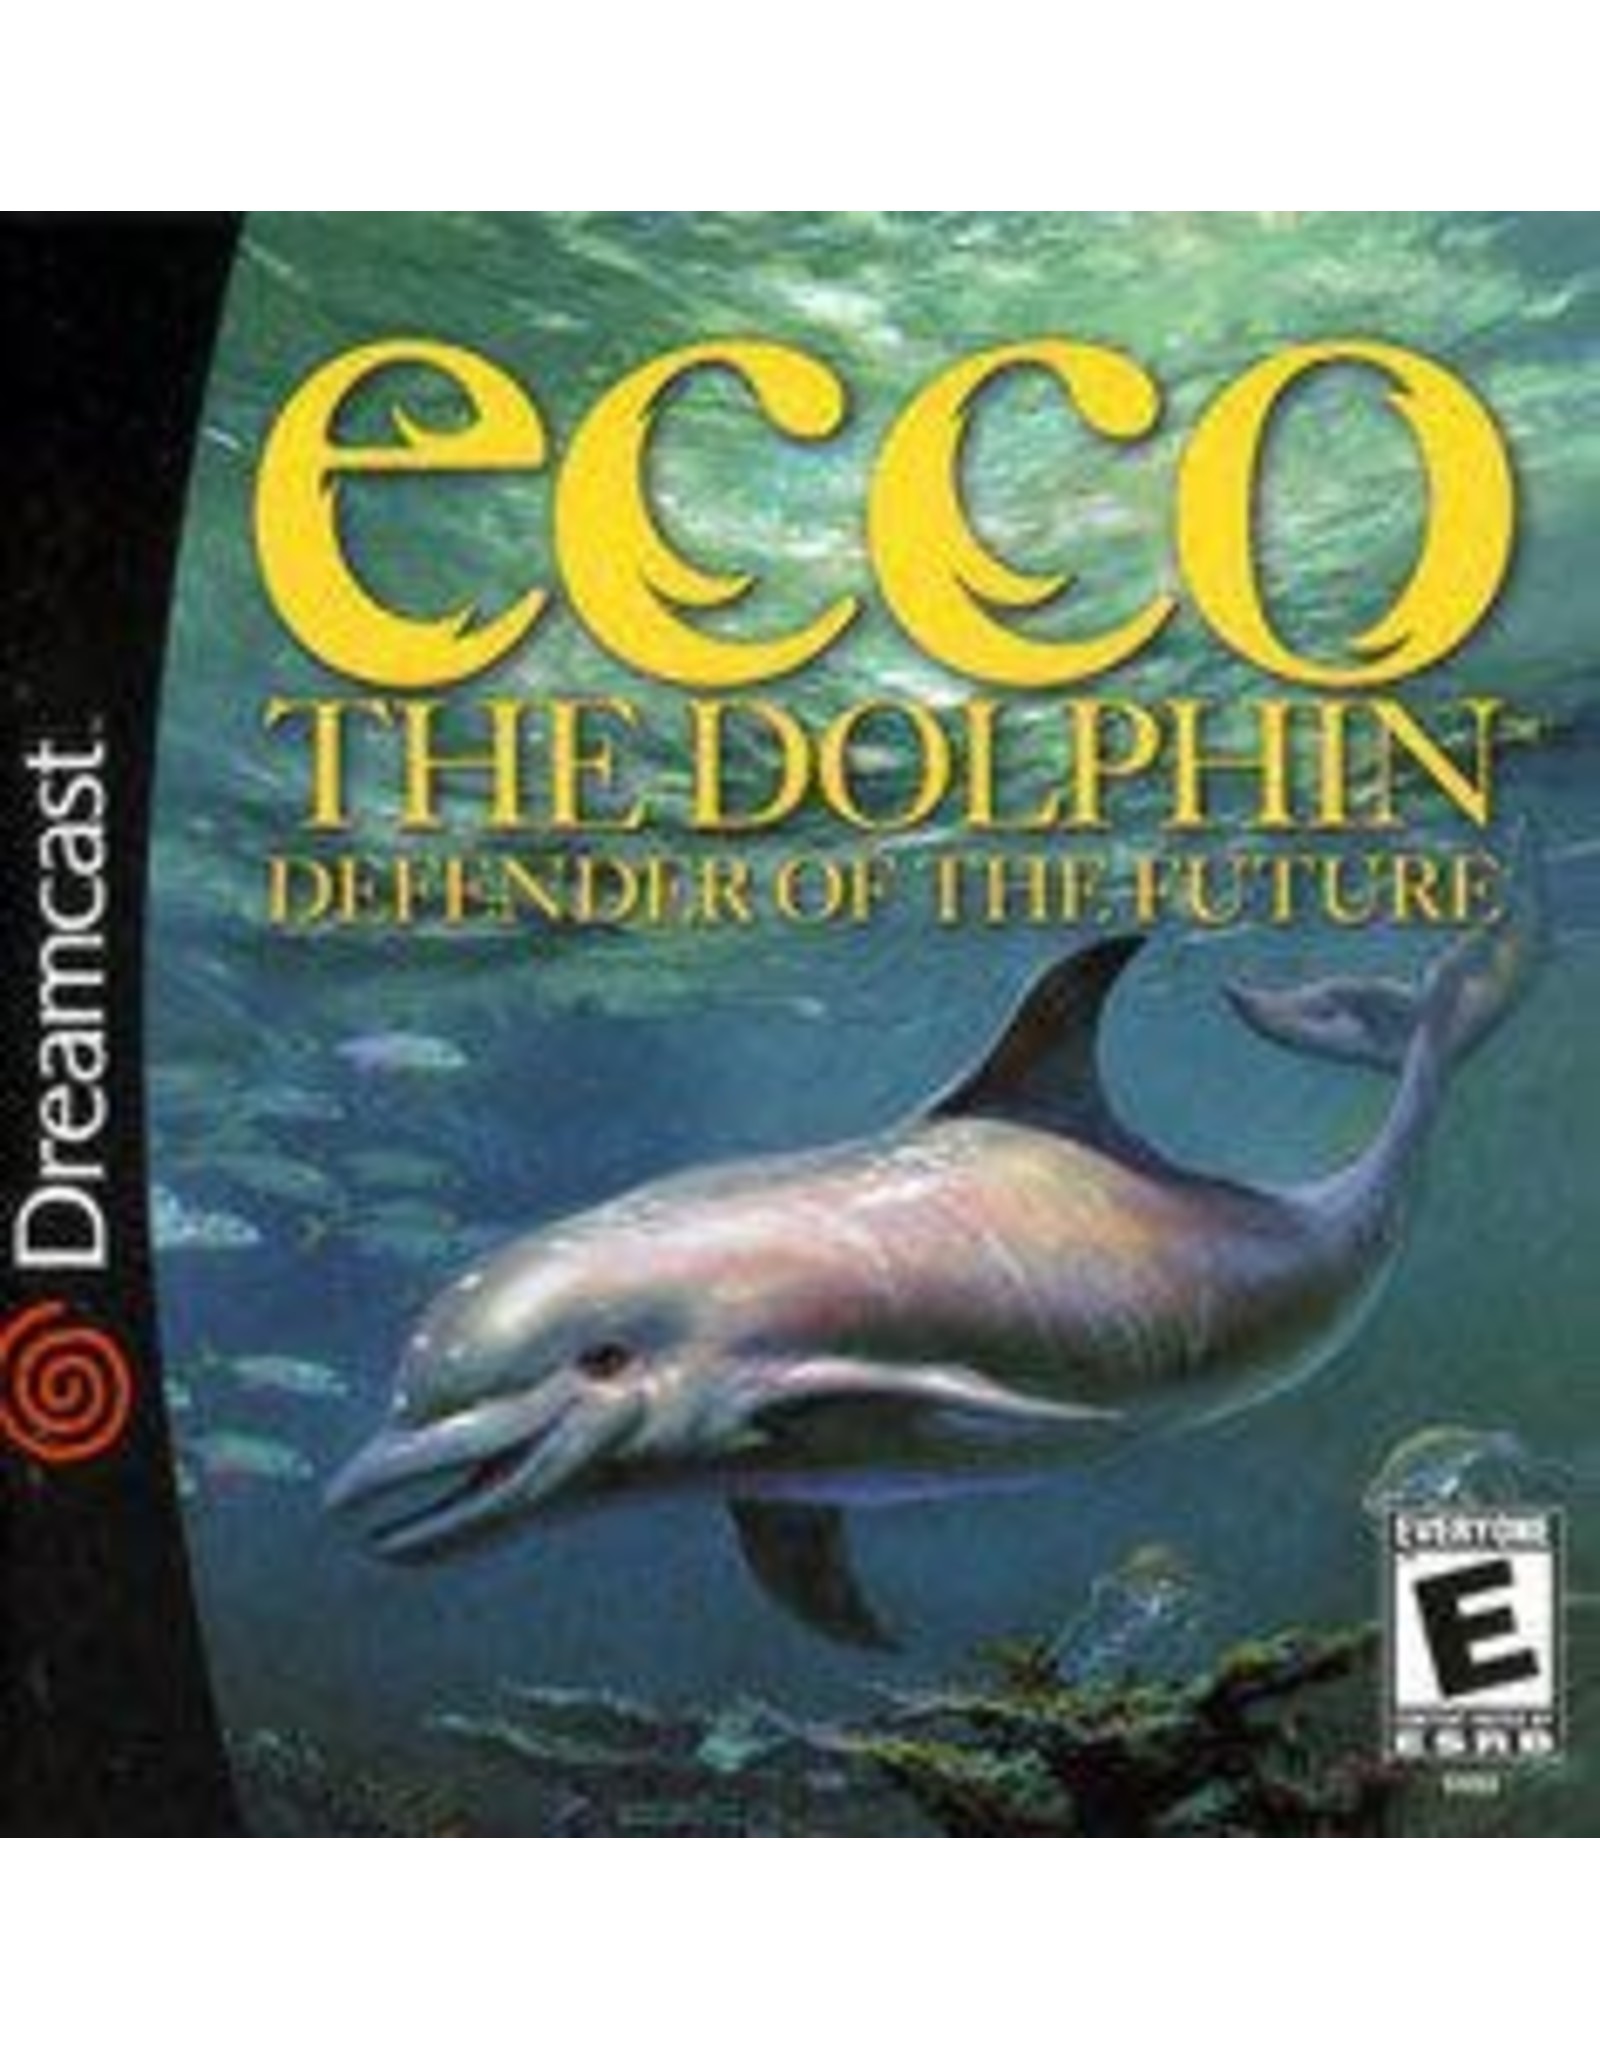 Sega Dreamcast Ecco the Dolphin Defender of the Future (Disc Only)